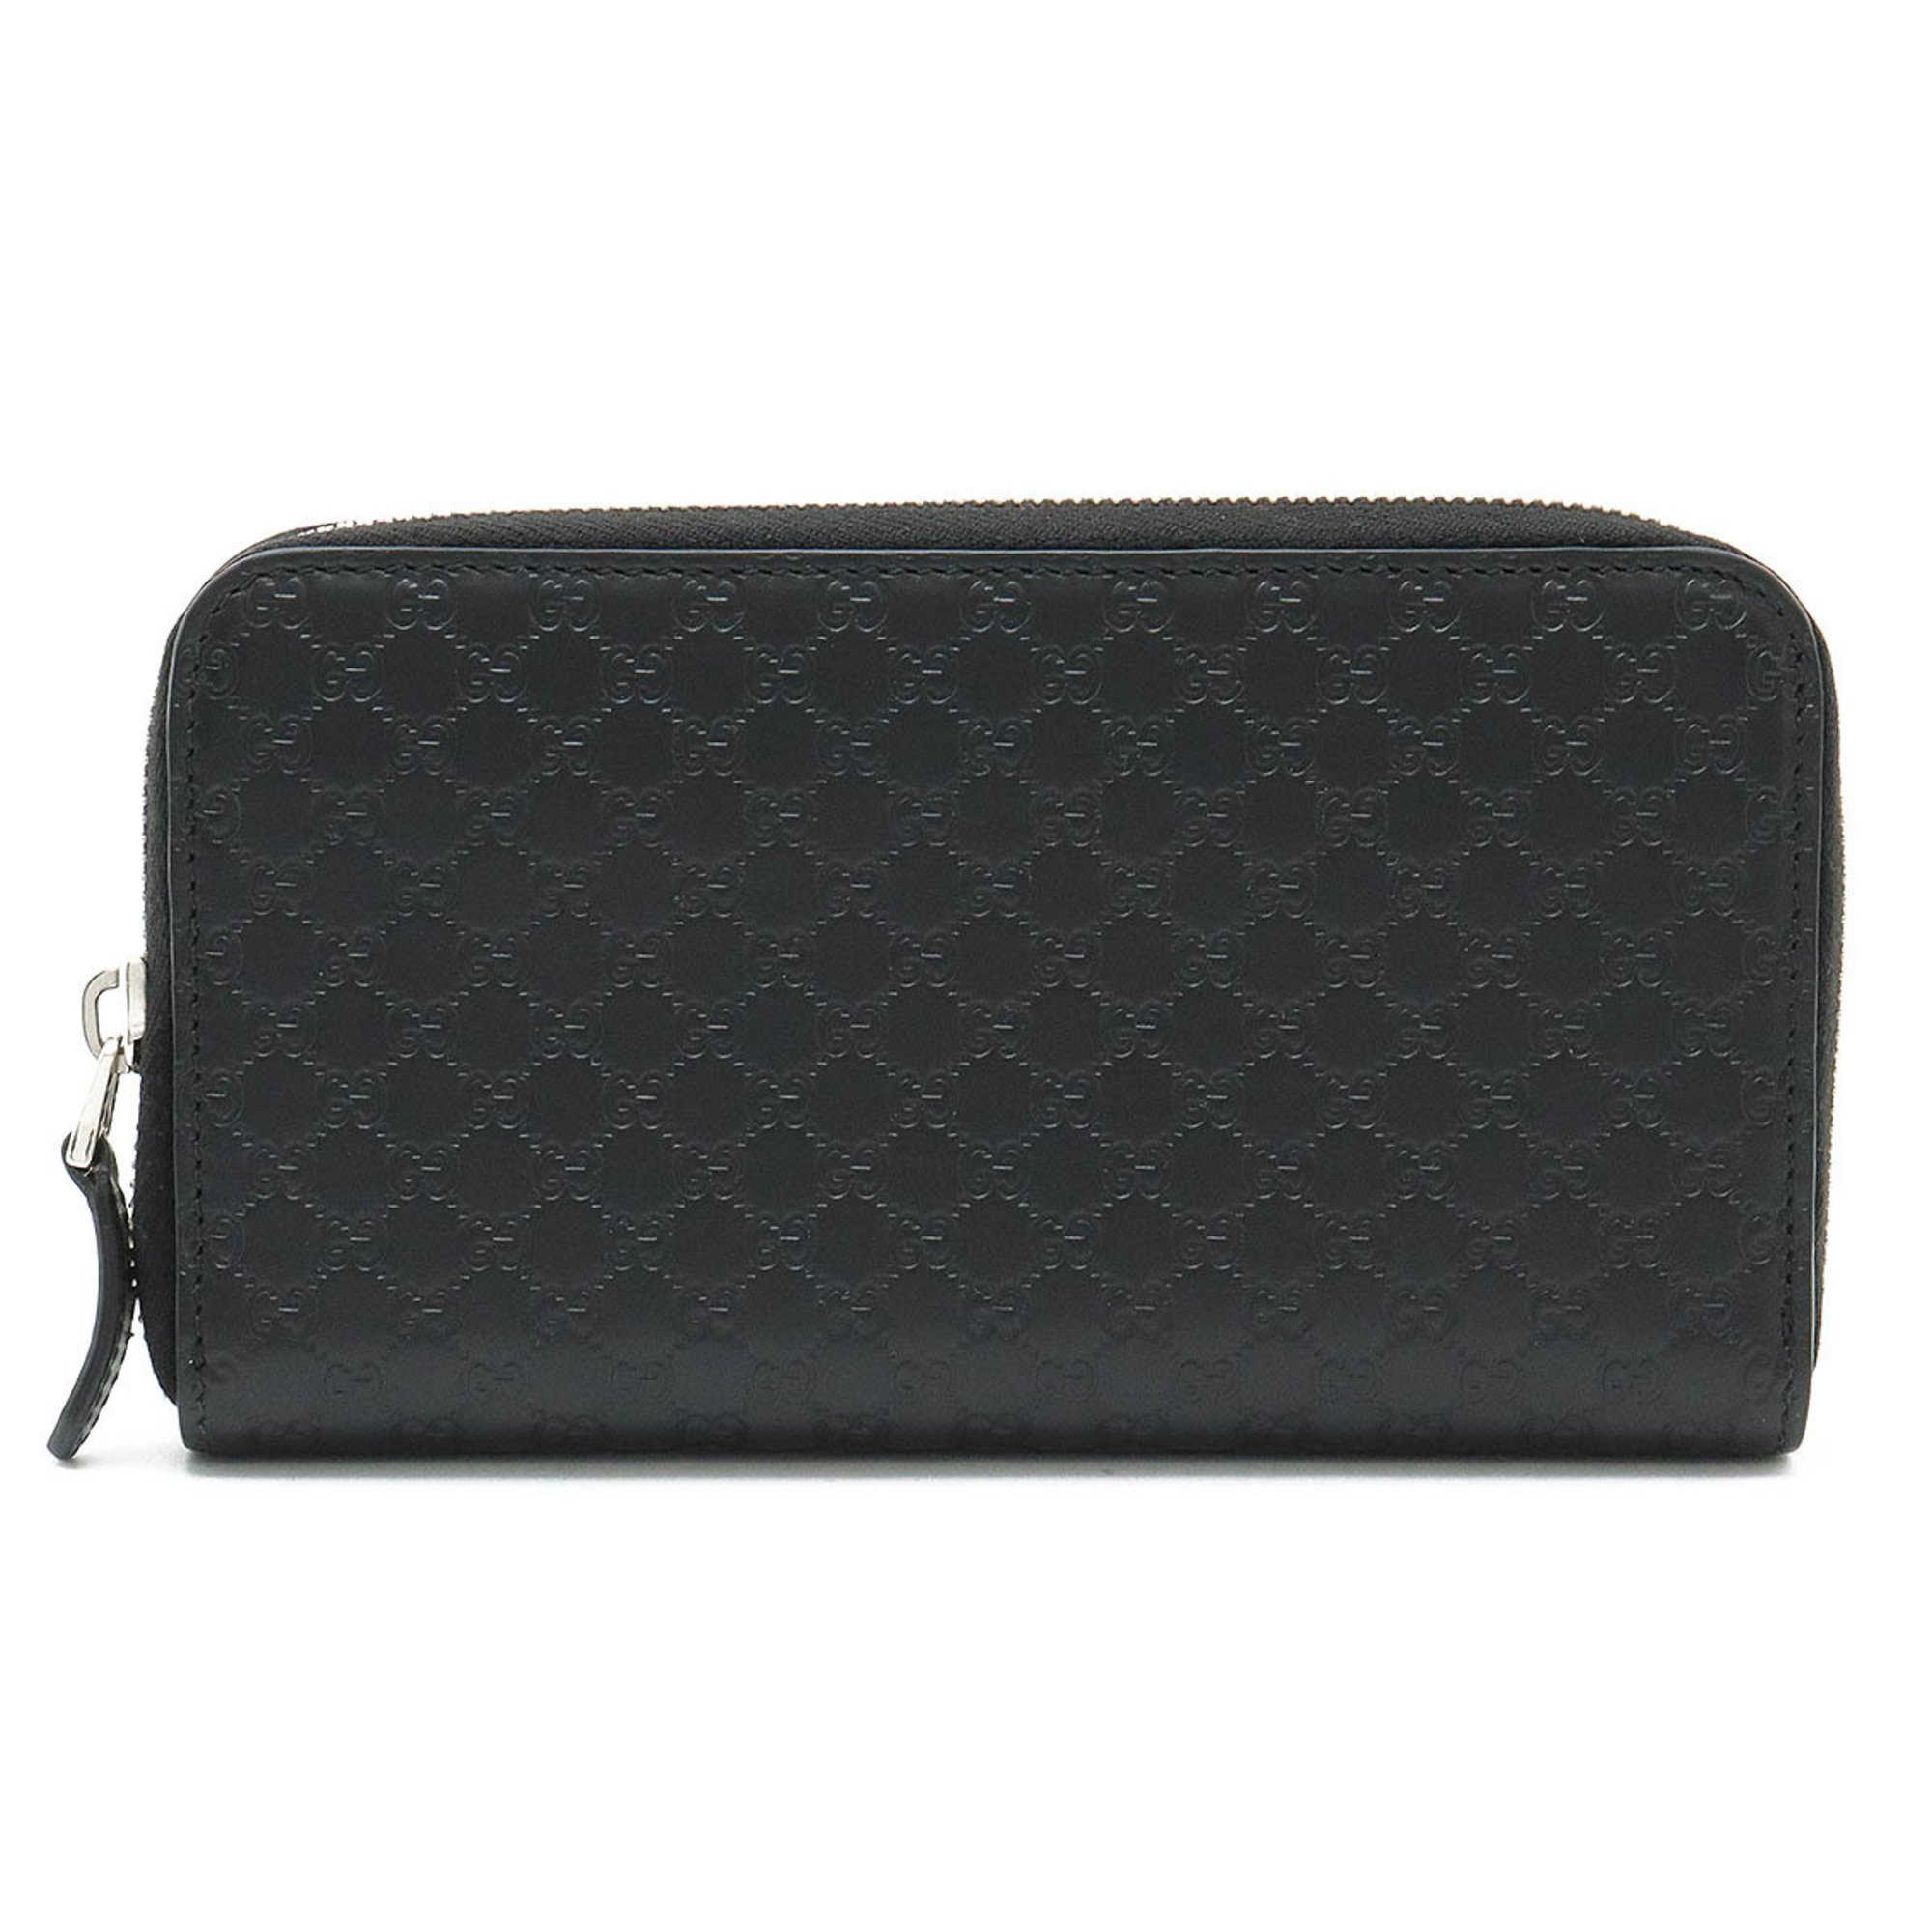 GUCCI Micro Guccissima Round Long Wallet Leather Black 544473